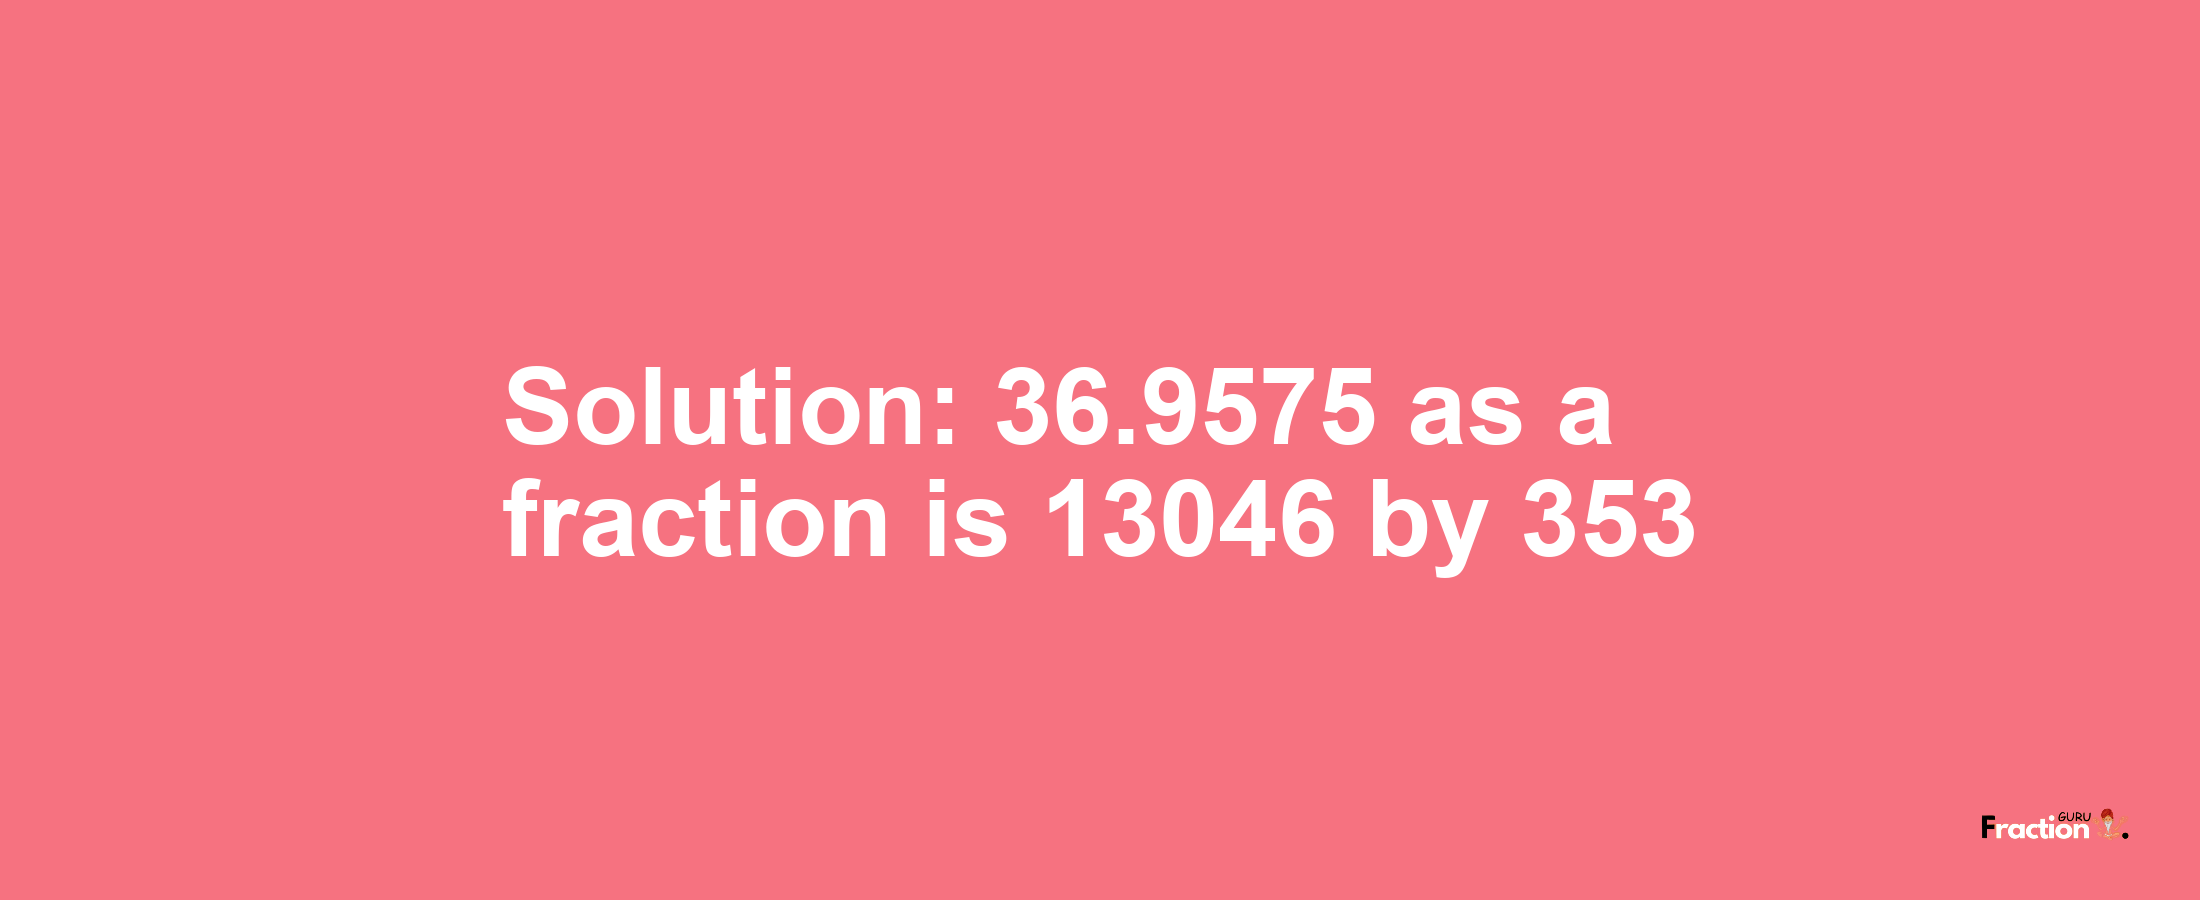 Solution:36.9575 as a fraction is 13046/353